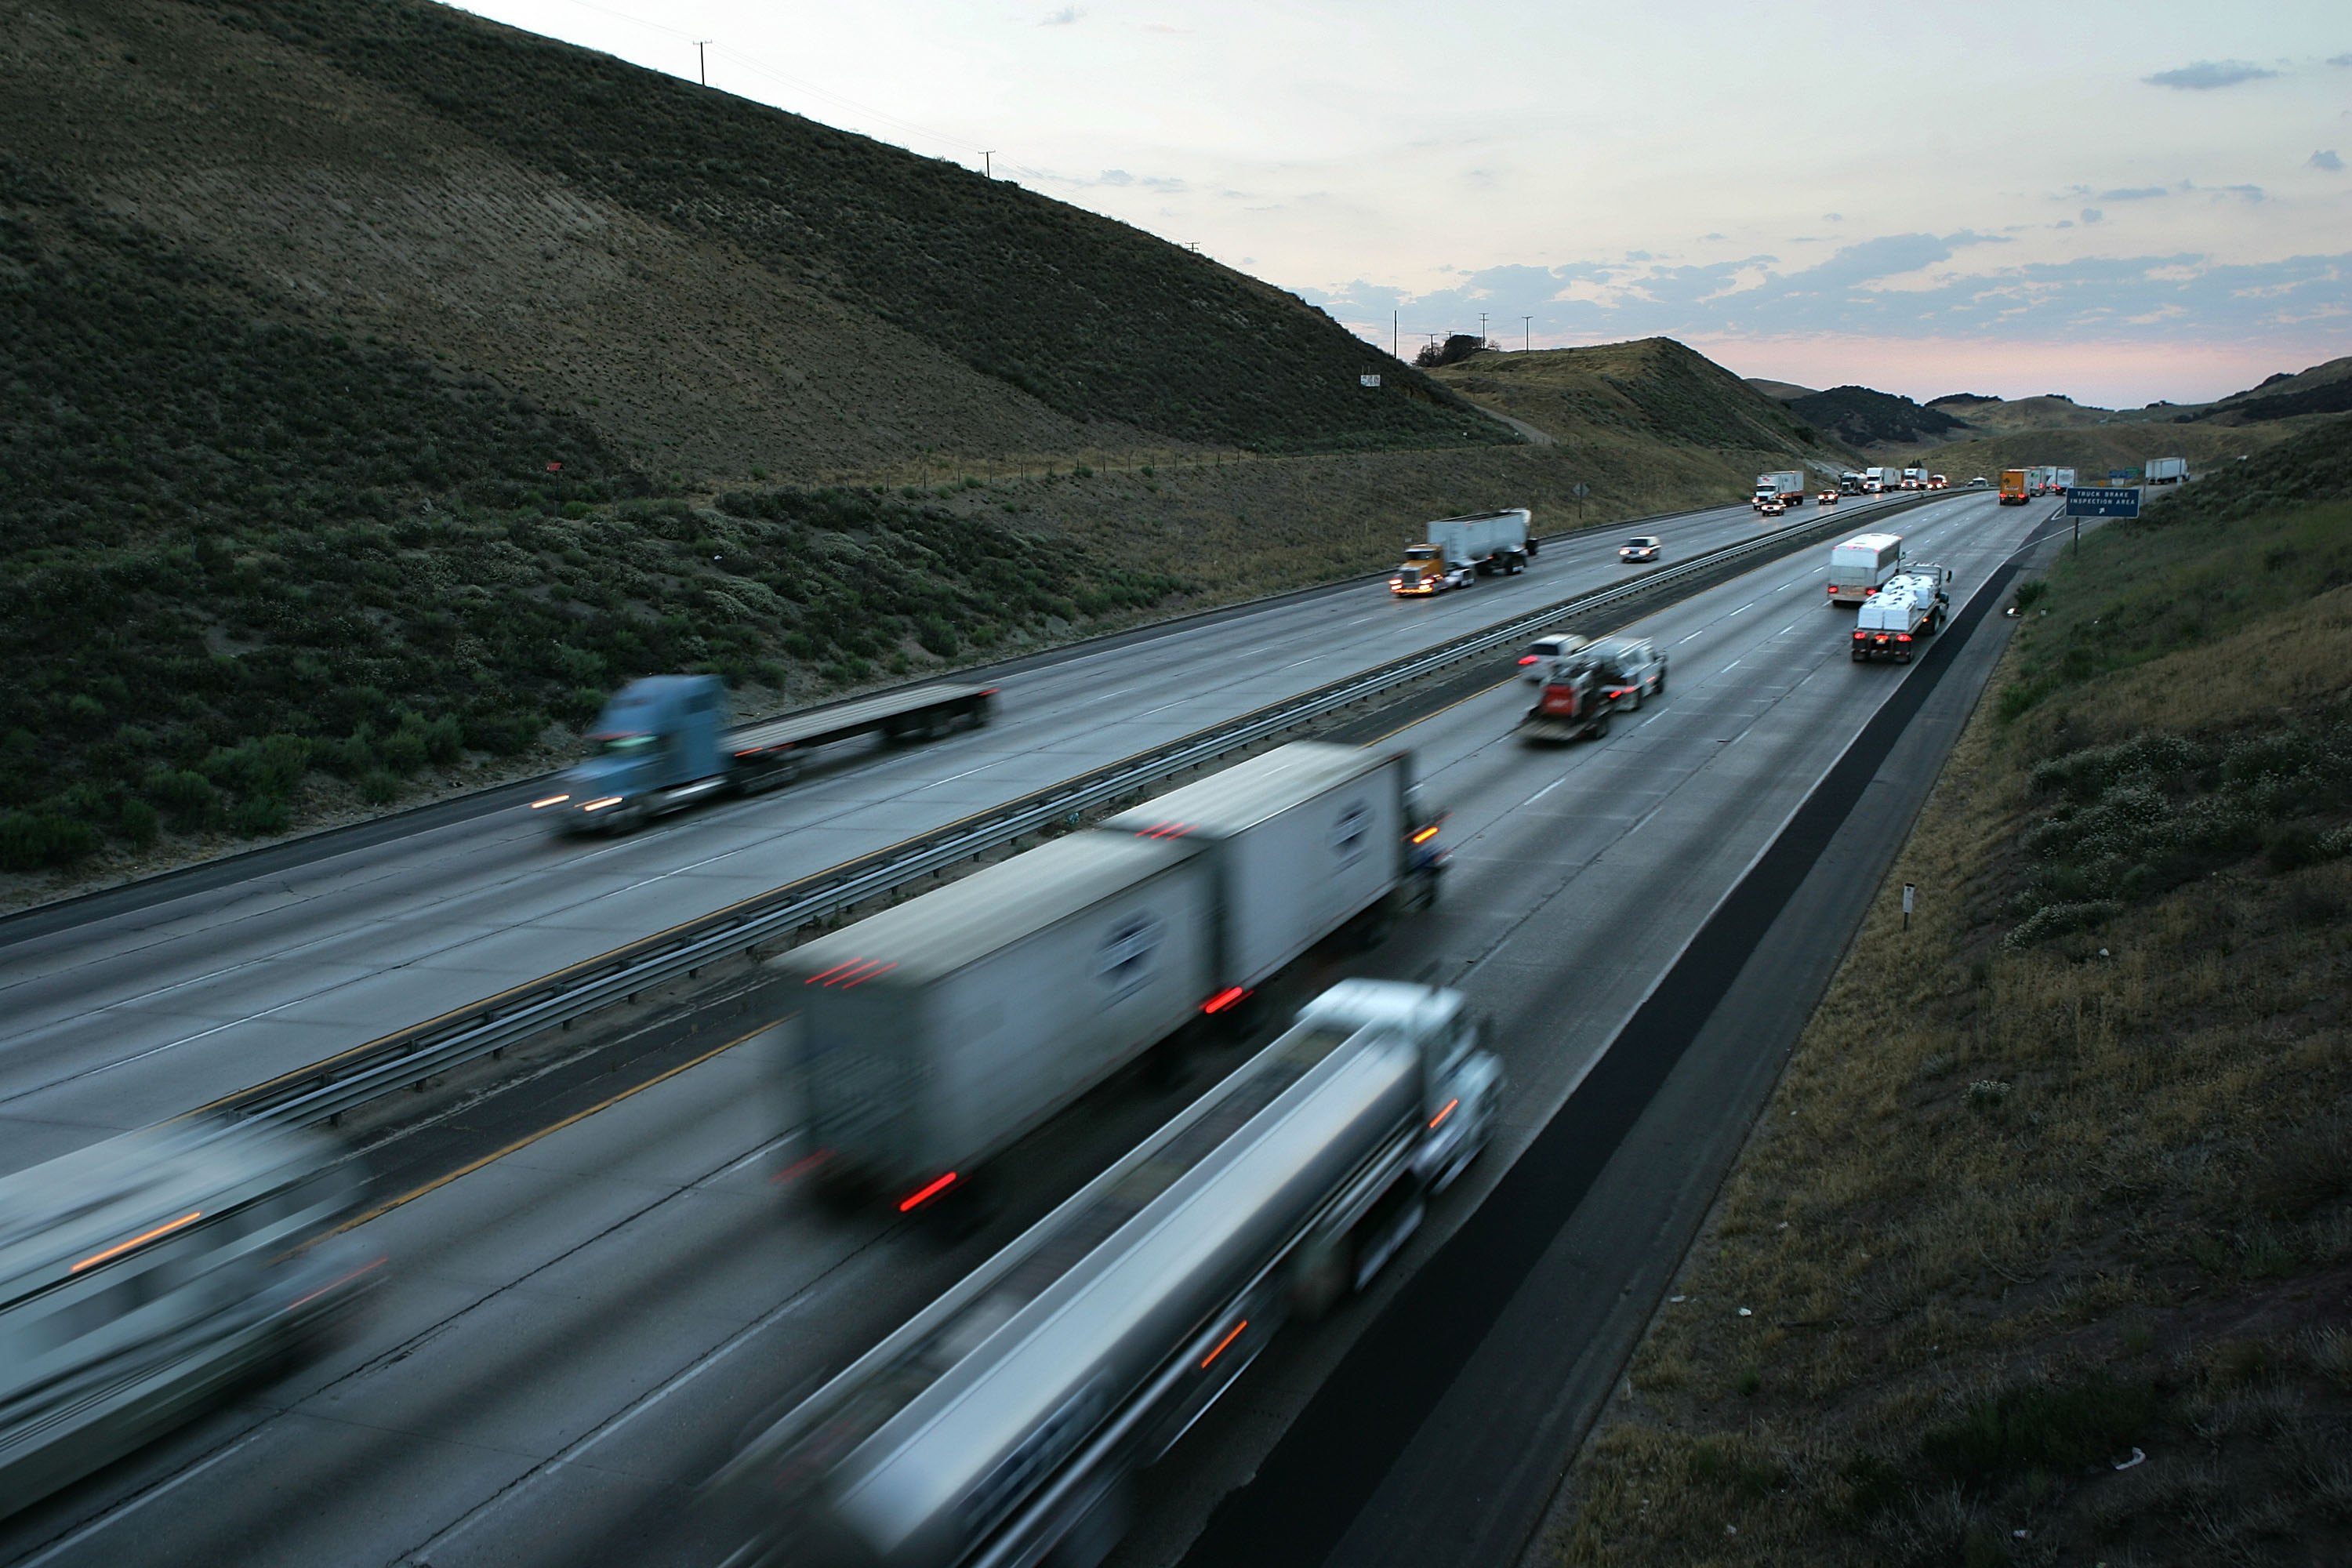 GORMAN, CA - JUNE 30: Trucks cross the San Andreas Fault at Tejon Pass between Los Angeles and northern California, Interstate 5, on June 30, 2006 near Gorman, California. Scientists are warning that after more than 300 years, the southern end of the 800-mile-long San Andreas Fault north and east of Los Angeles has built up immense pressure that could trigger a massive earthquake at any time. Such a quake could produce a sudden lateral movement of 23 to 32 feet which would be would be among the largest ever recorded. By comparison, the 1906 earthquake at the northern end of the fault destroyed San Francisco with a movement of no more than about 21 feet. Experts believed that a quake of magnitude-7.6 or greater on the lower San Andreas could kill thousands of people in the Los Angeles area with damages running into the tens of billions of dollars. (Photo by David McNew/Getty Images)